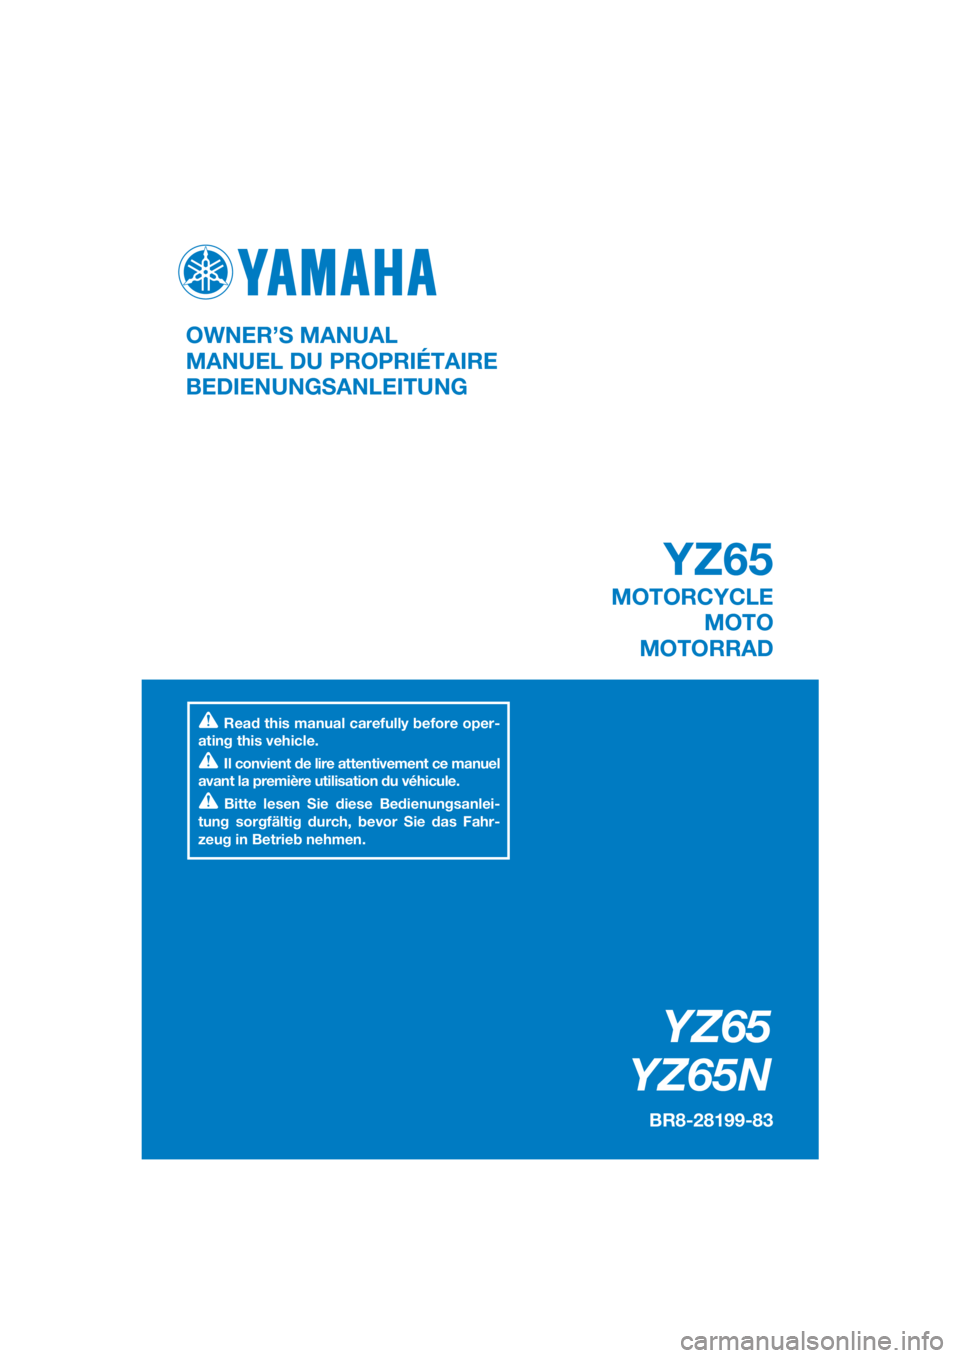 YAMAHA YZ65 2022  Betriebsanleitungen (in German) DIC183
YZ65
YZ65N
BR8-28199-83
OWNER’S MANUAL
MANUEL DU PROPRIÉTAIRE
BEDIENUNGSANLEITUNG
Read this manual carefully before oper-
ating this vehicle.
Il convient de lire attentivement ce manuel 
ava